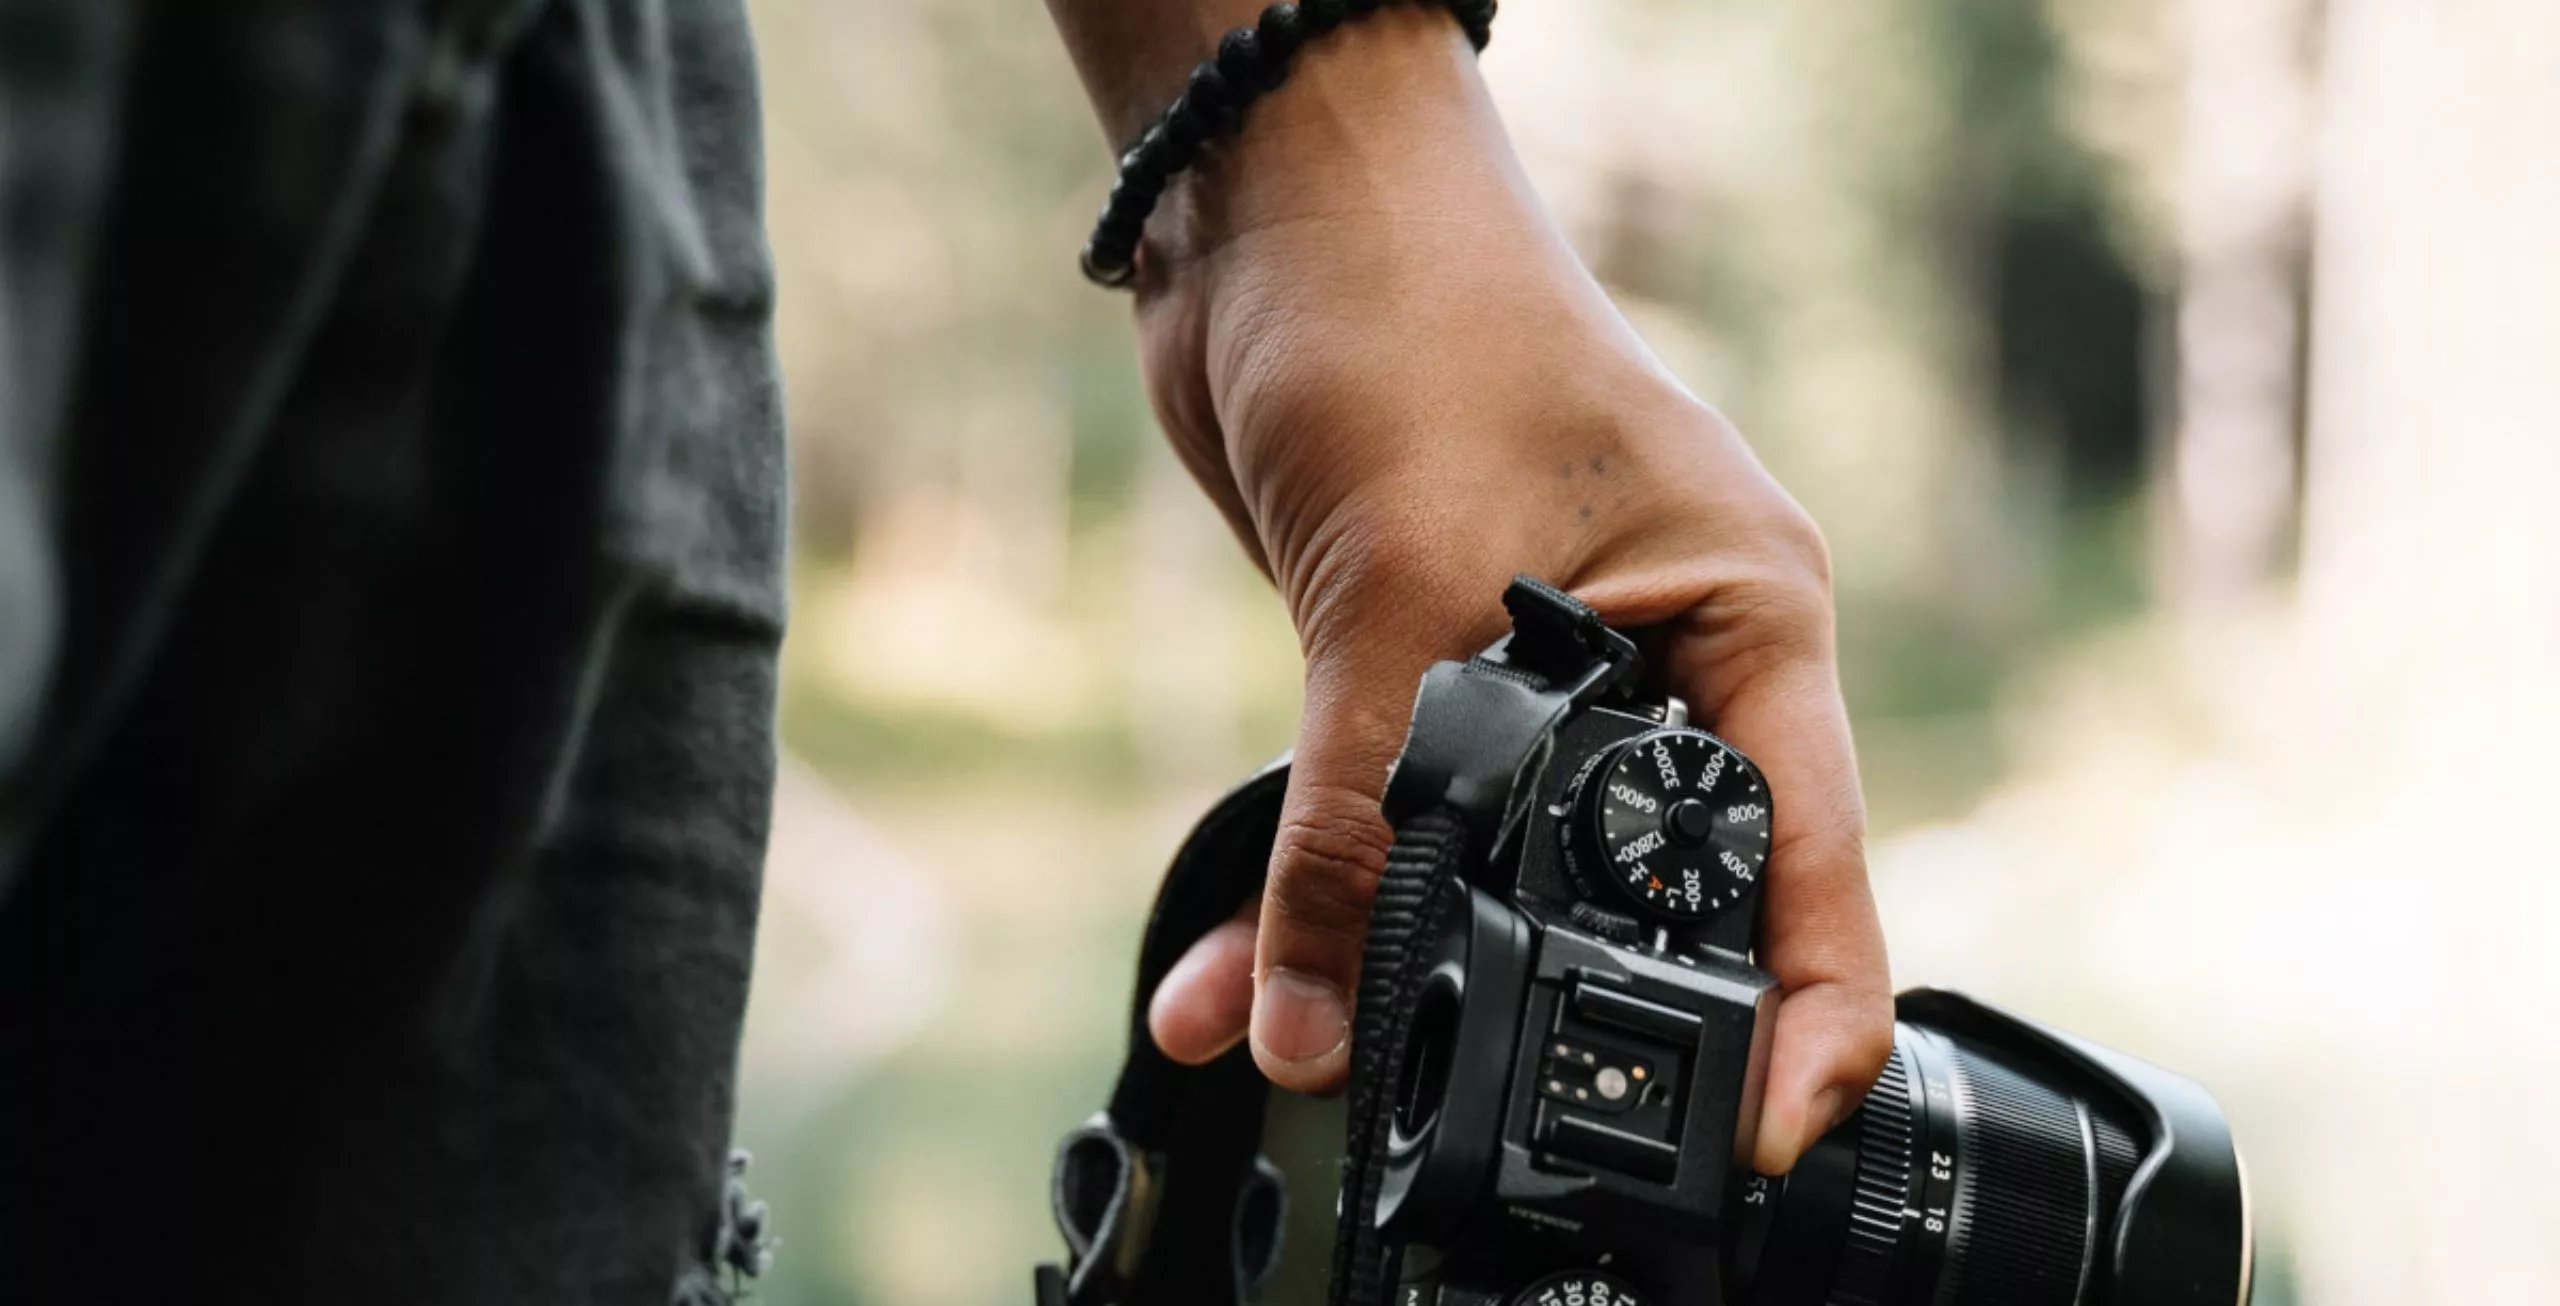 Adventures On Film: How To Capture Our Outdoor Activities Sustainably